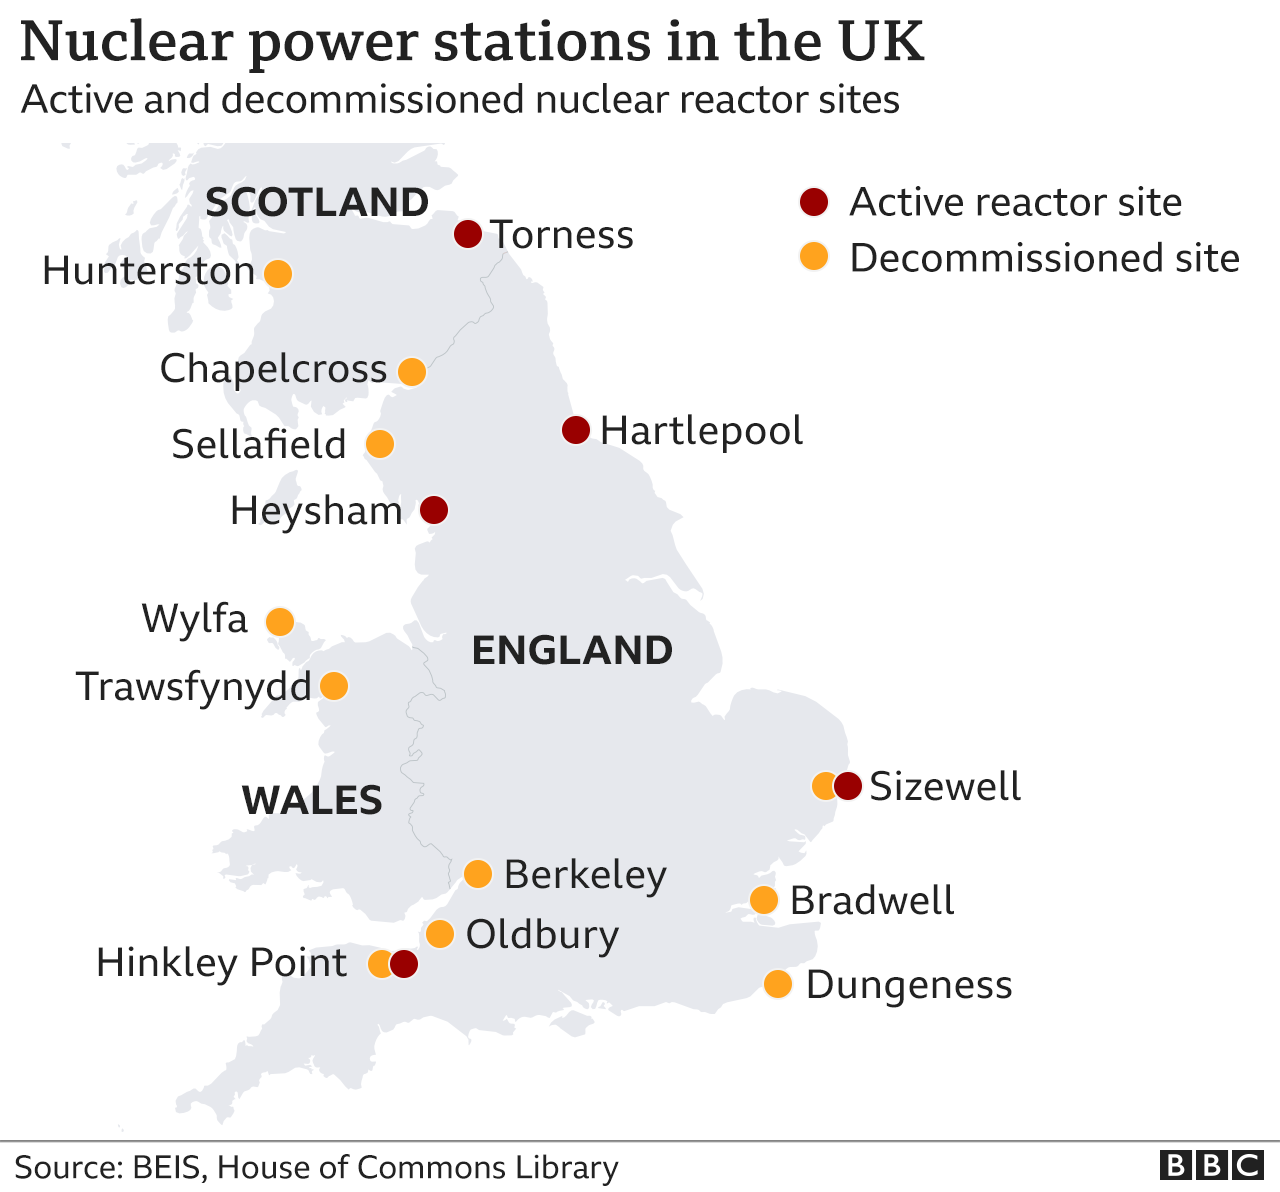 Map showing the location of nuclear reactors in the UK.